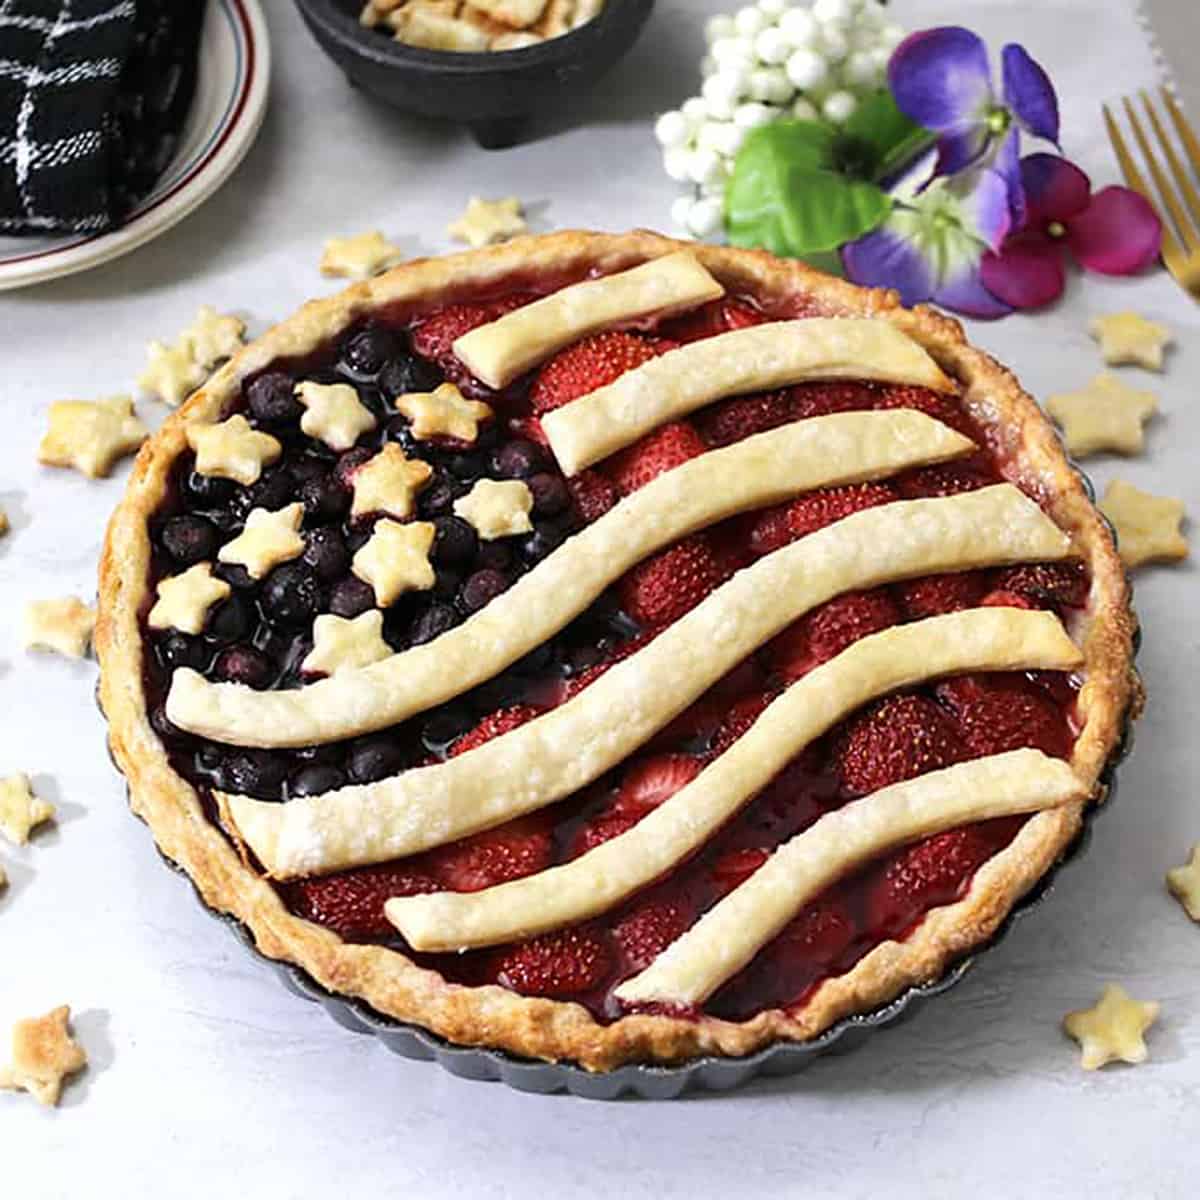 patriotic red white and blue pie dessert with strawberries and blueberries. 